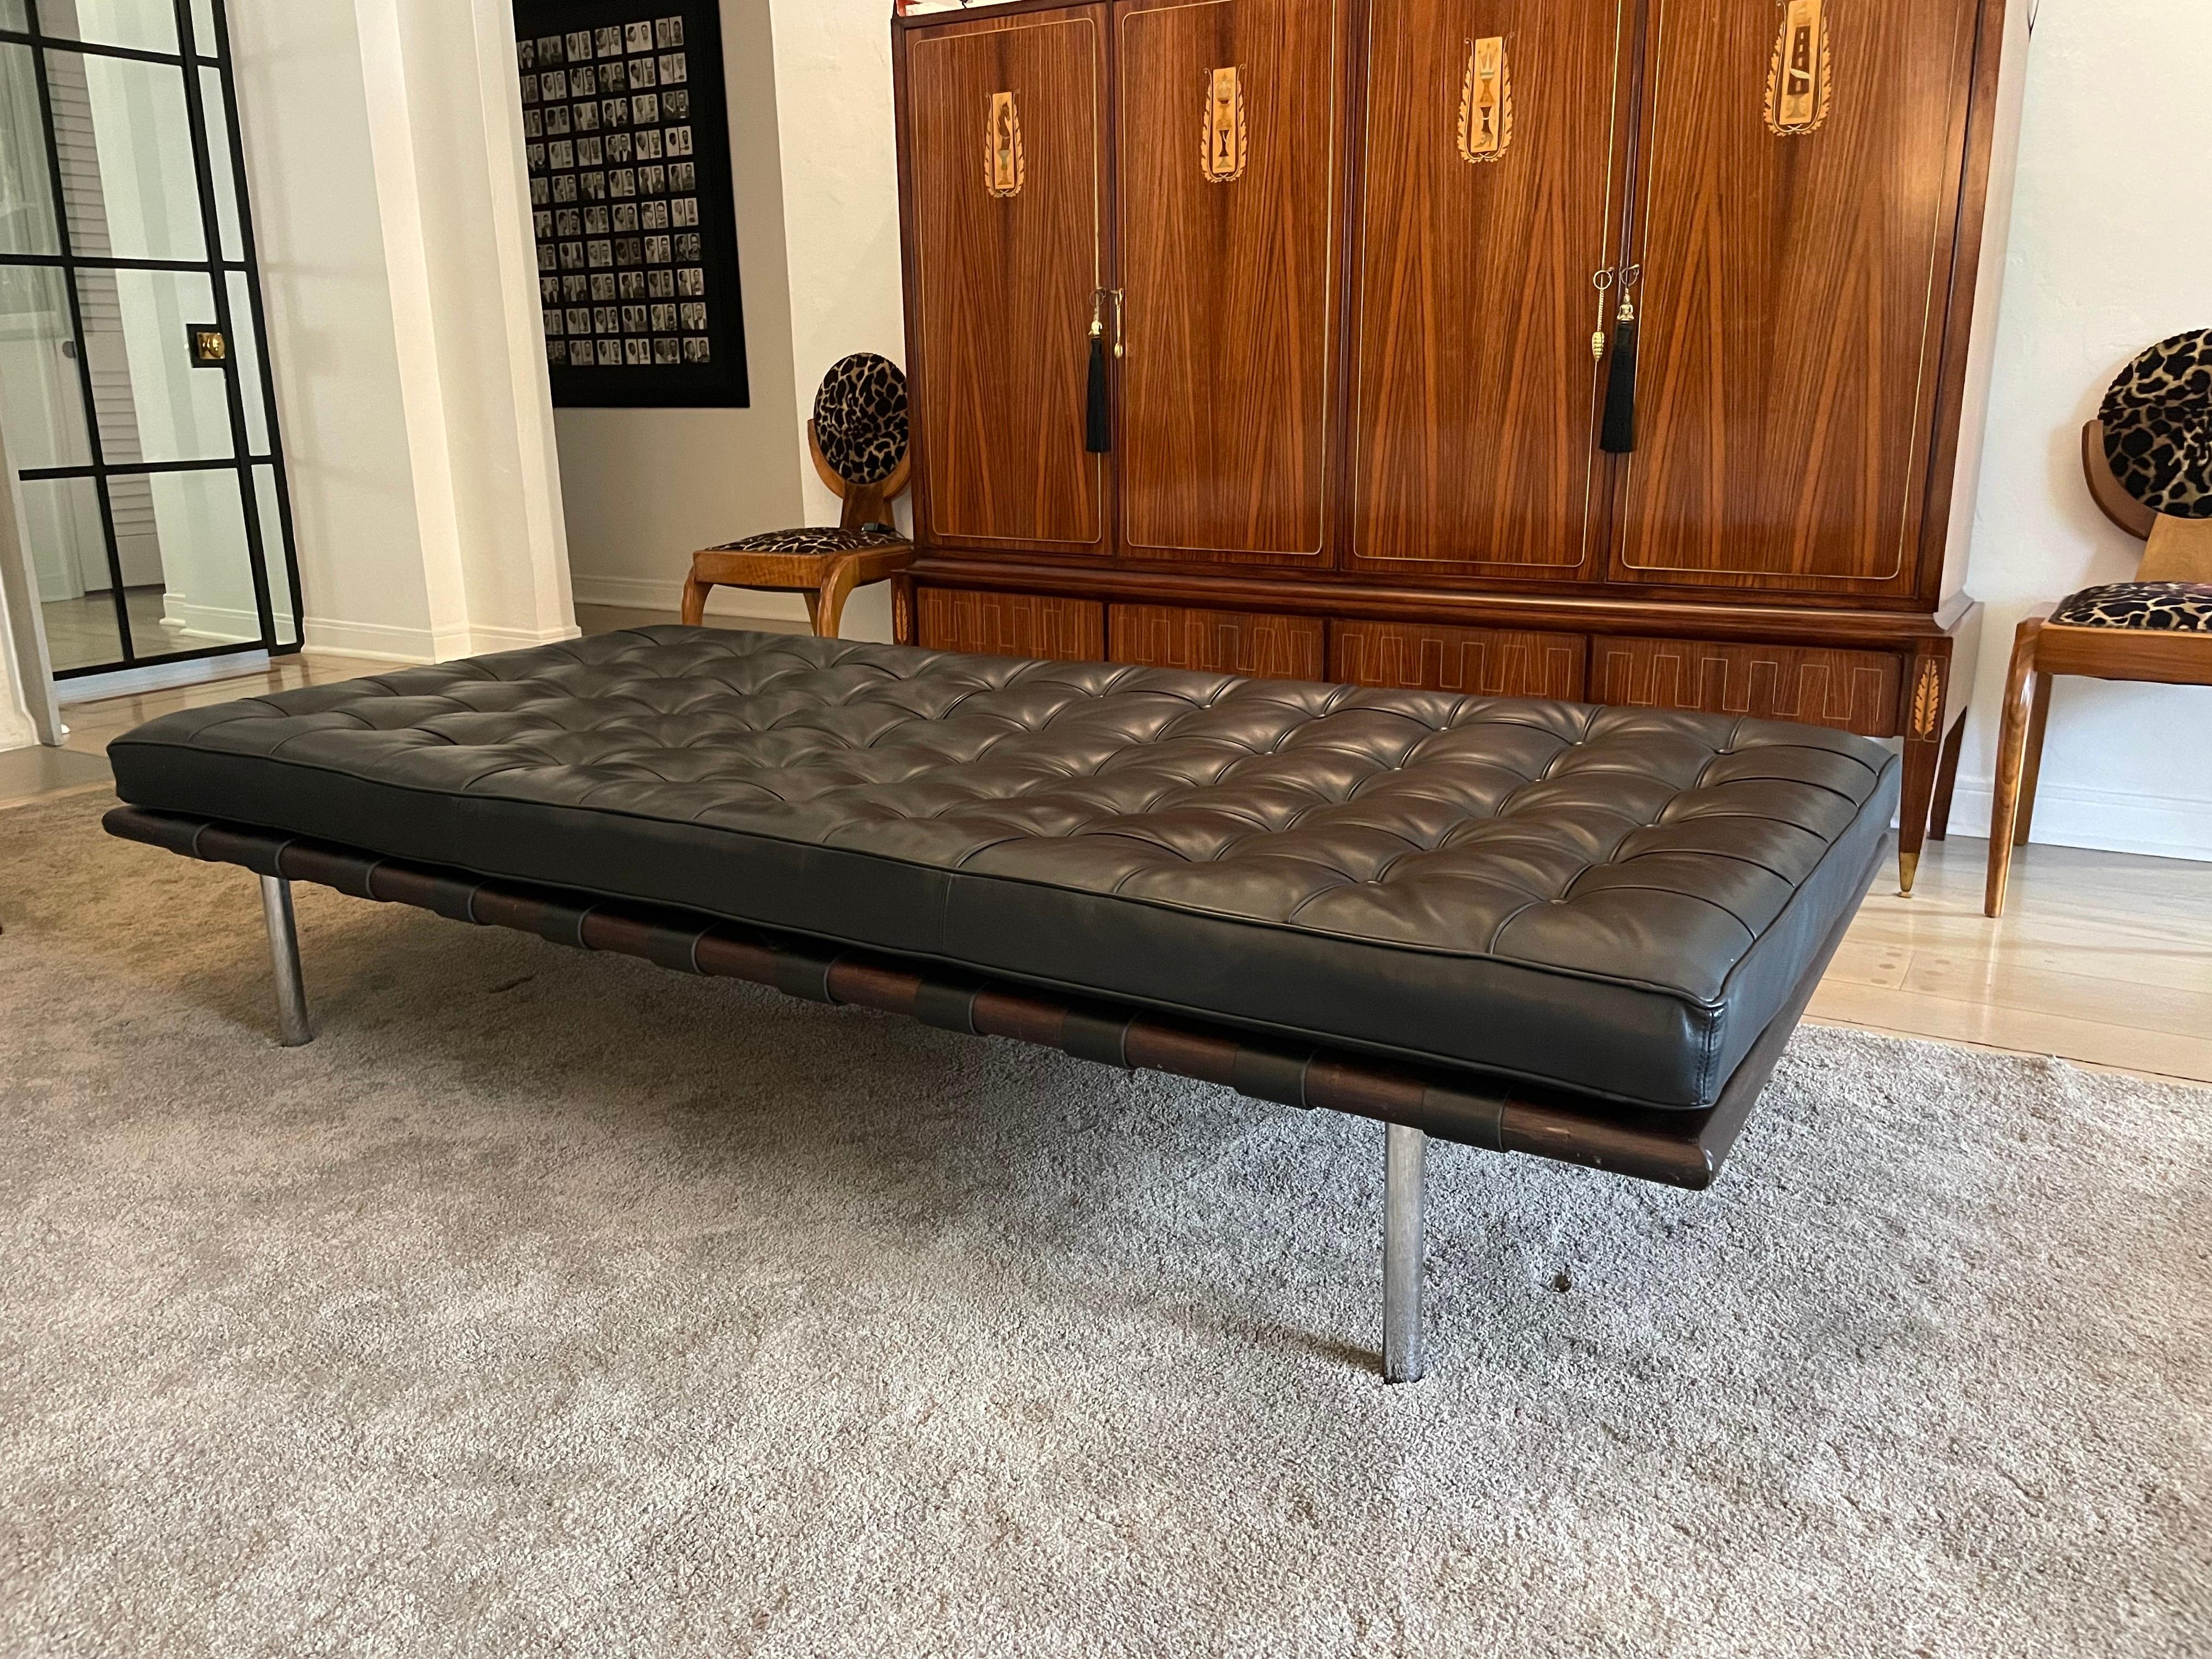 Black leather daybed designed by Ludwig Mies van der Rohe during the late 1920s with Roll pillow that straps to the bed cushion.

This piece was originally designed for use in the German Pavilion during the 1929 International Exposition in